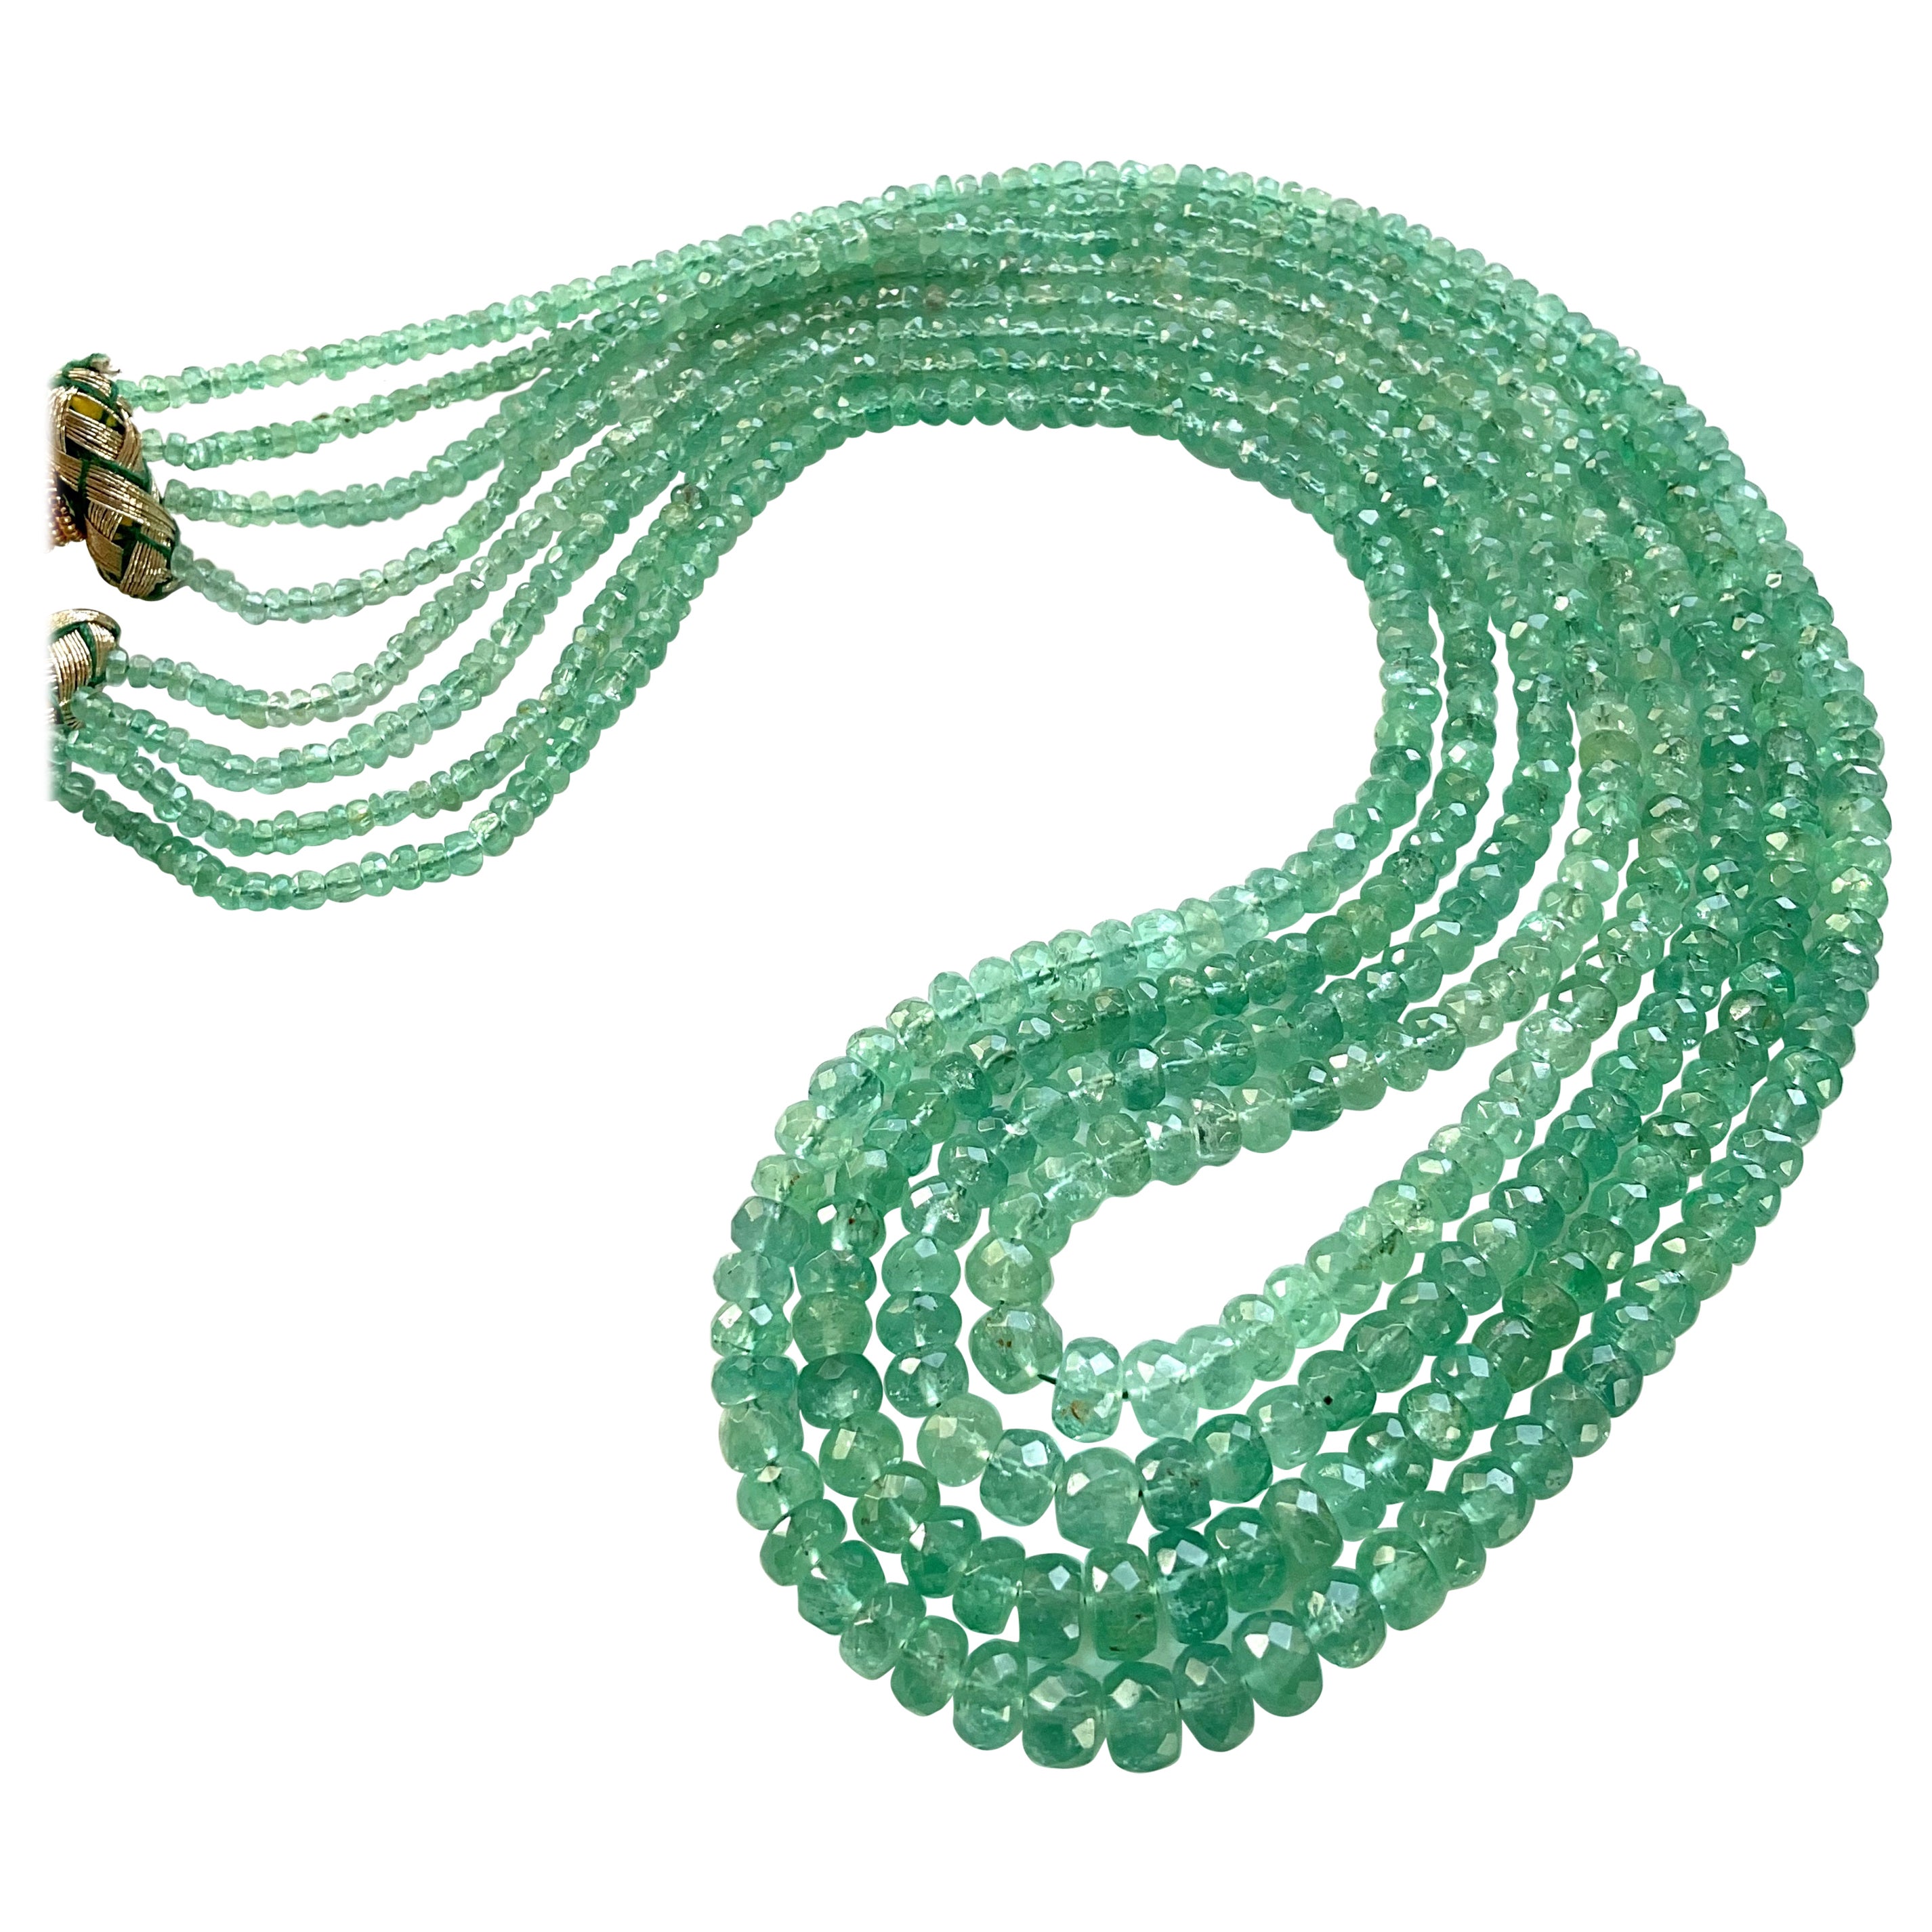 198.40 Carats Panjshir Emerald Faceted Beads For Fine Jewelry Natural Gemstone